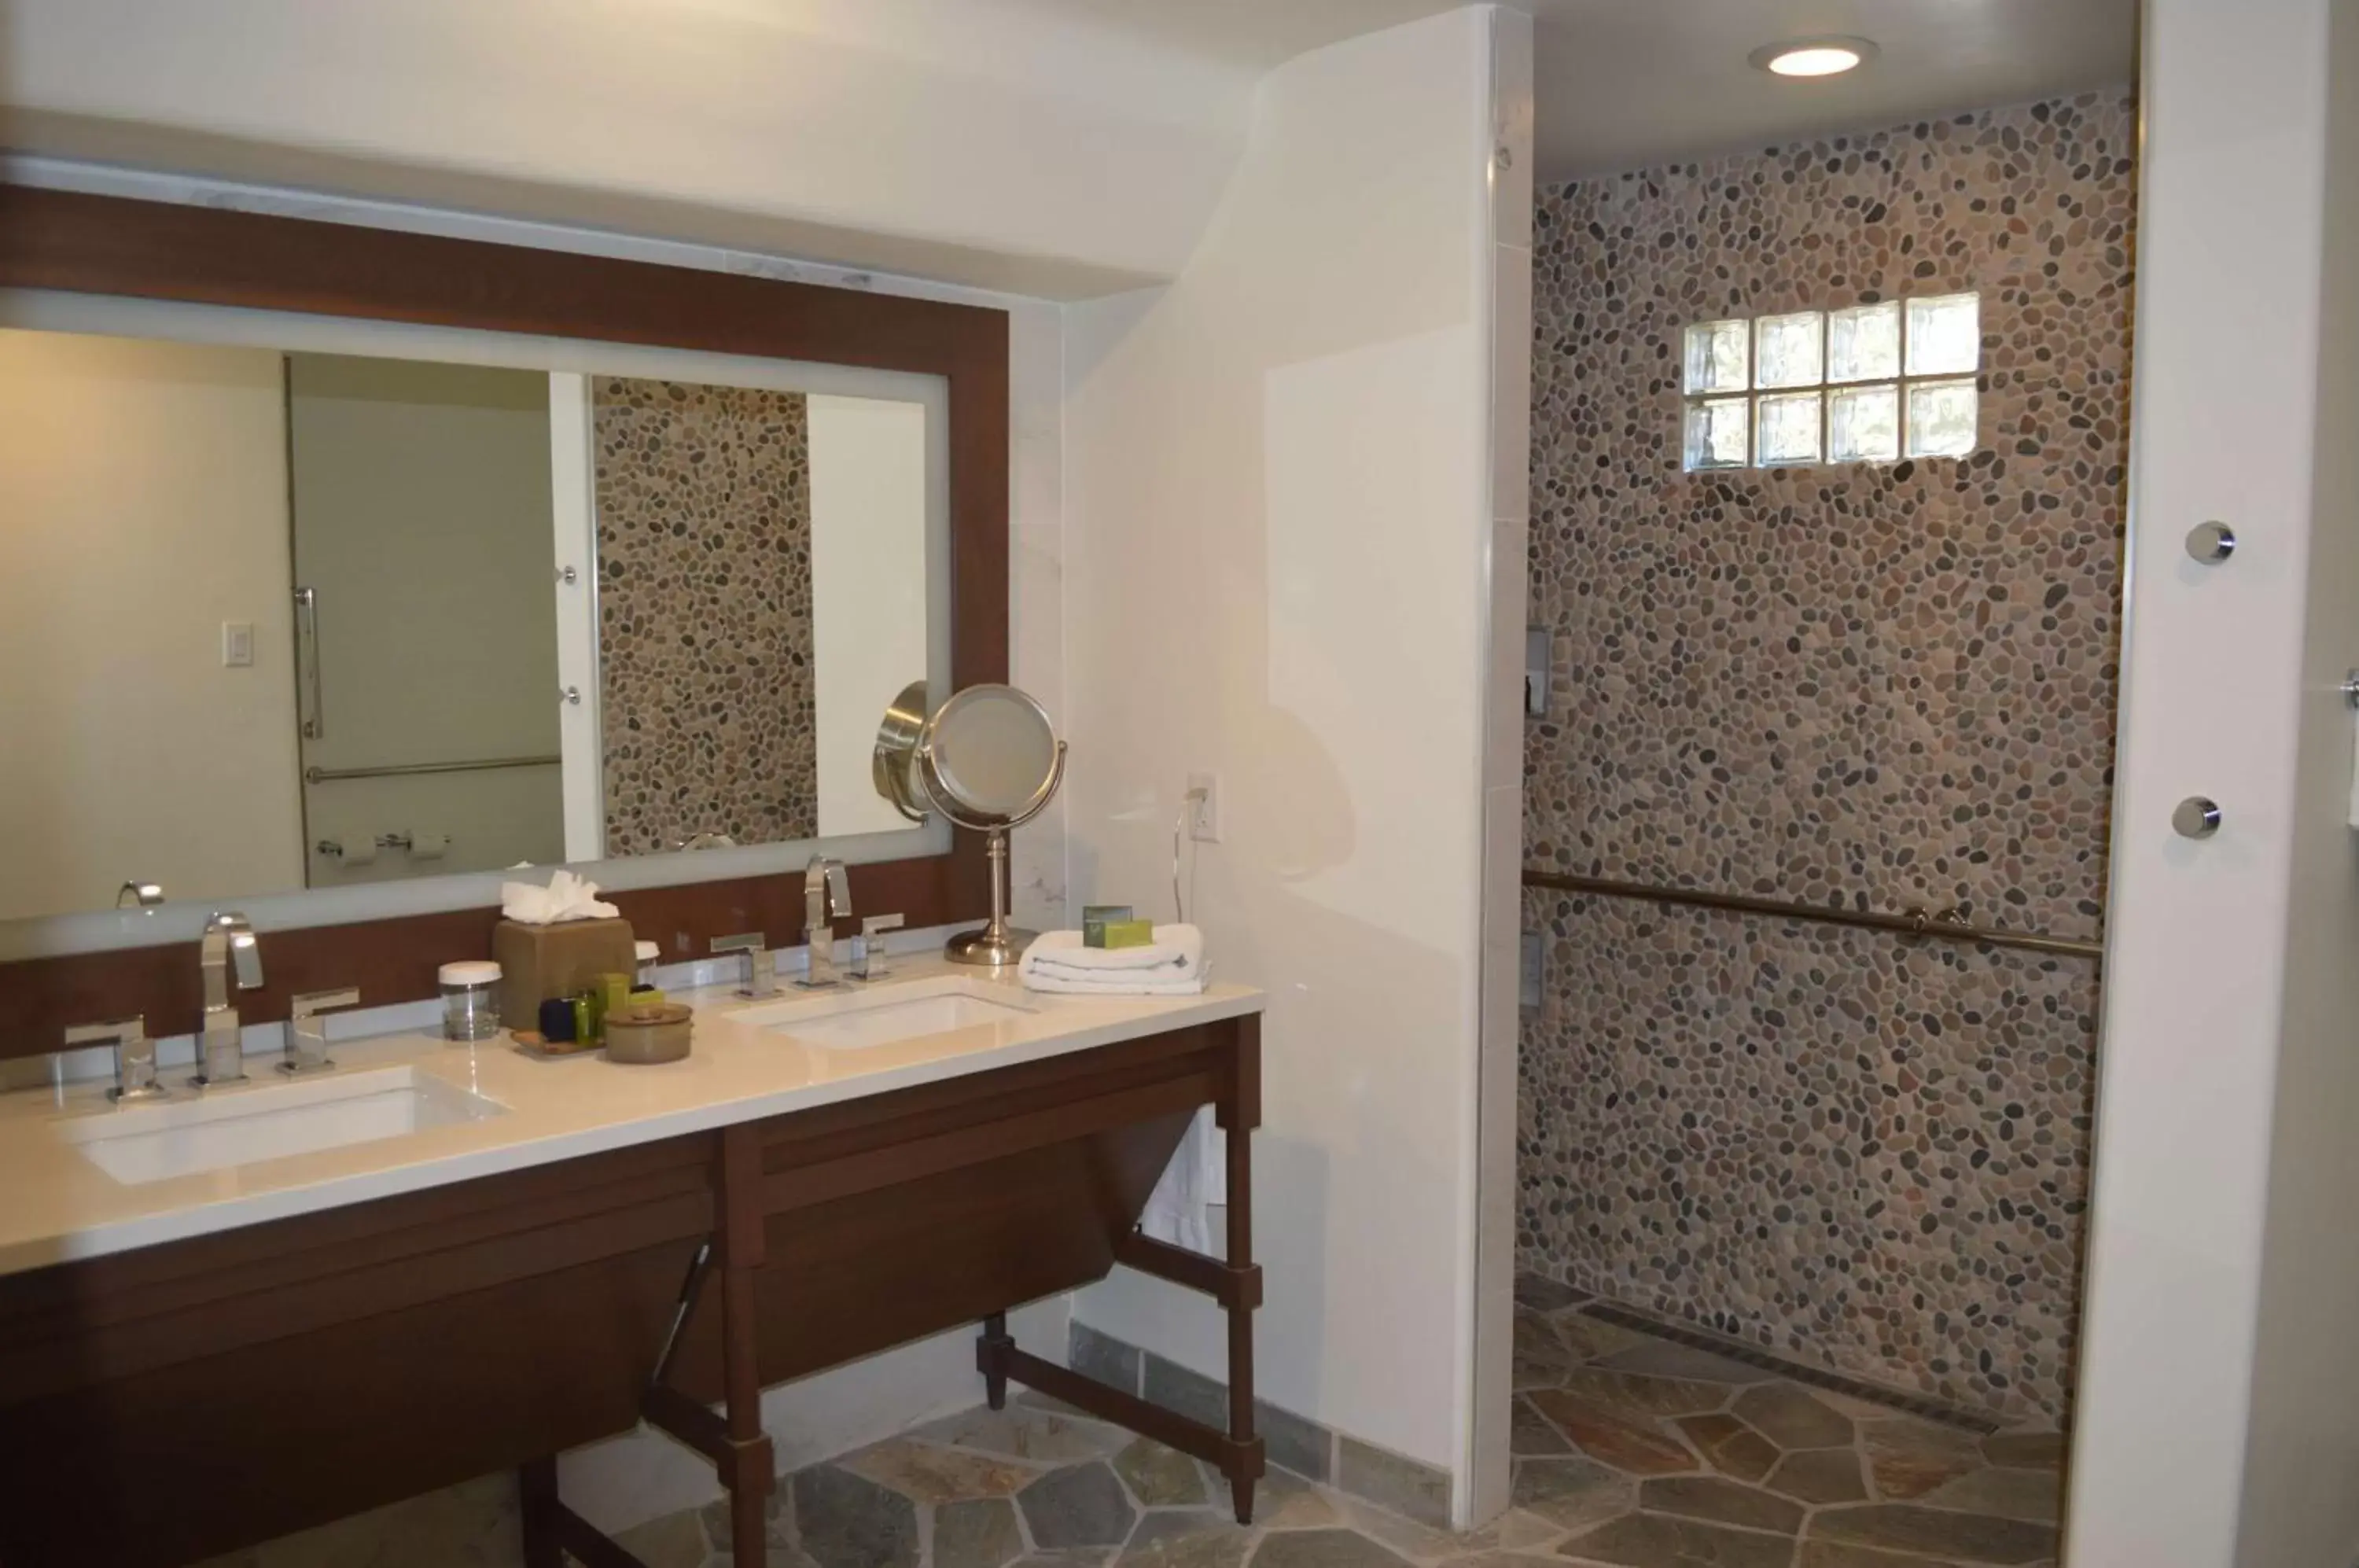 Bathroom in Boulders Resort & Spa Scottsdale, Curio Collection by Hilton